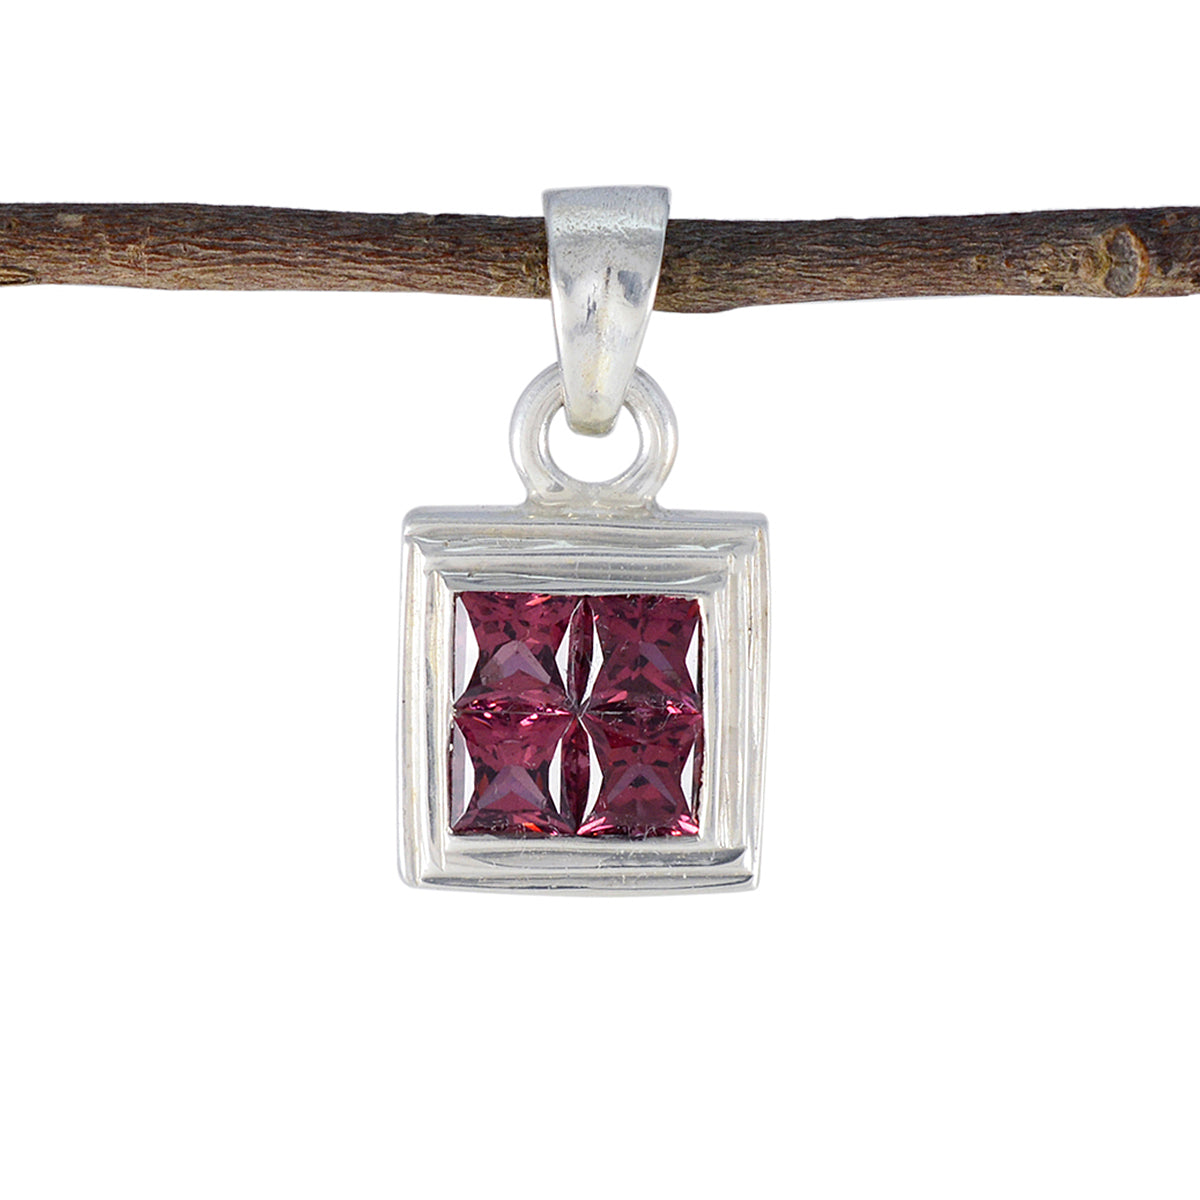 Riyo Stunning Gems Square Faceted Red Garnet Solid Silver Pendant Gift For Wedding